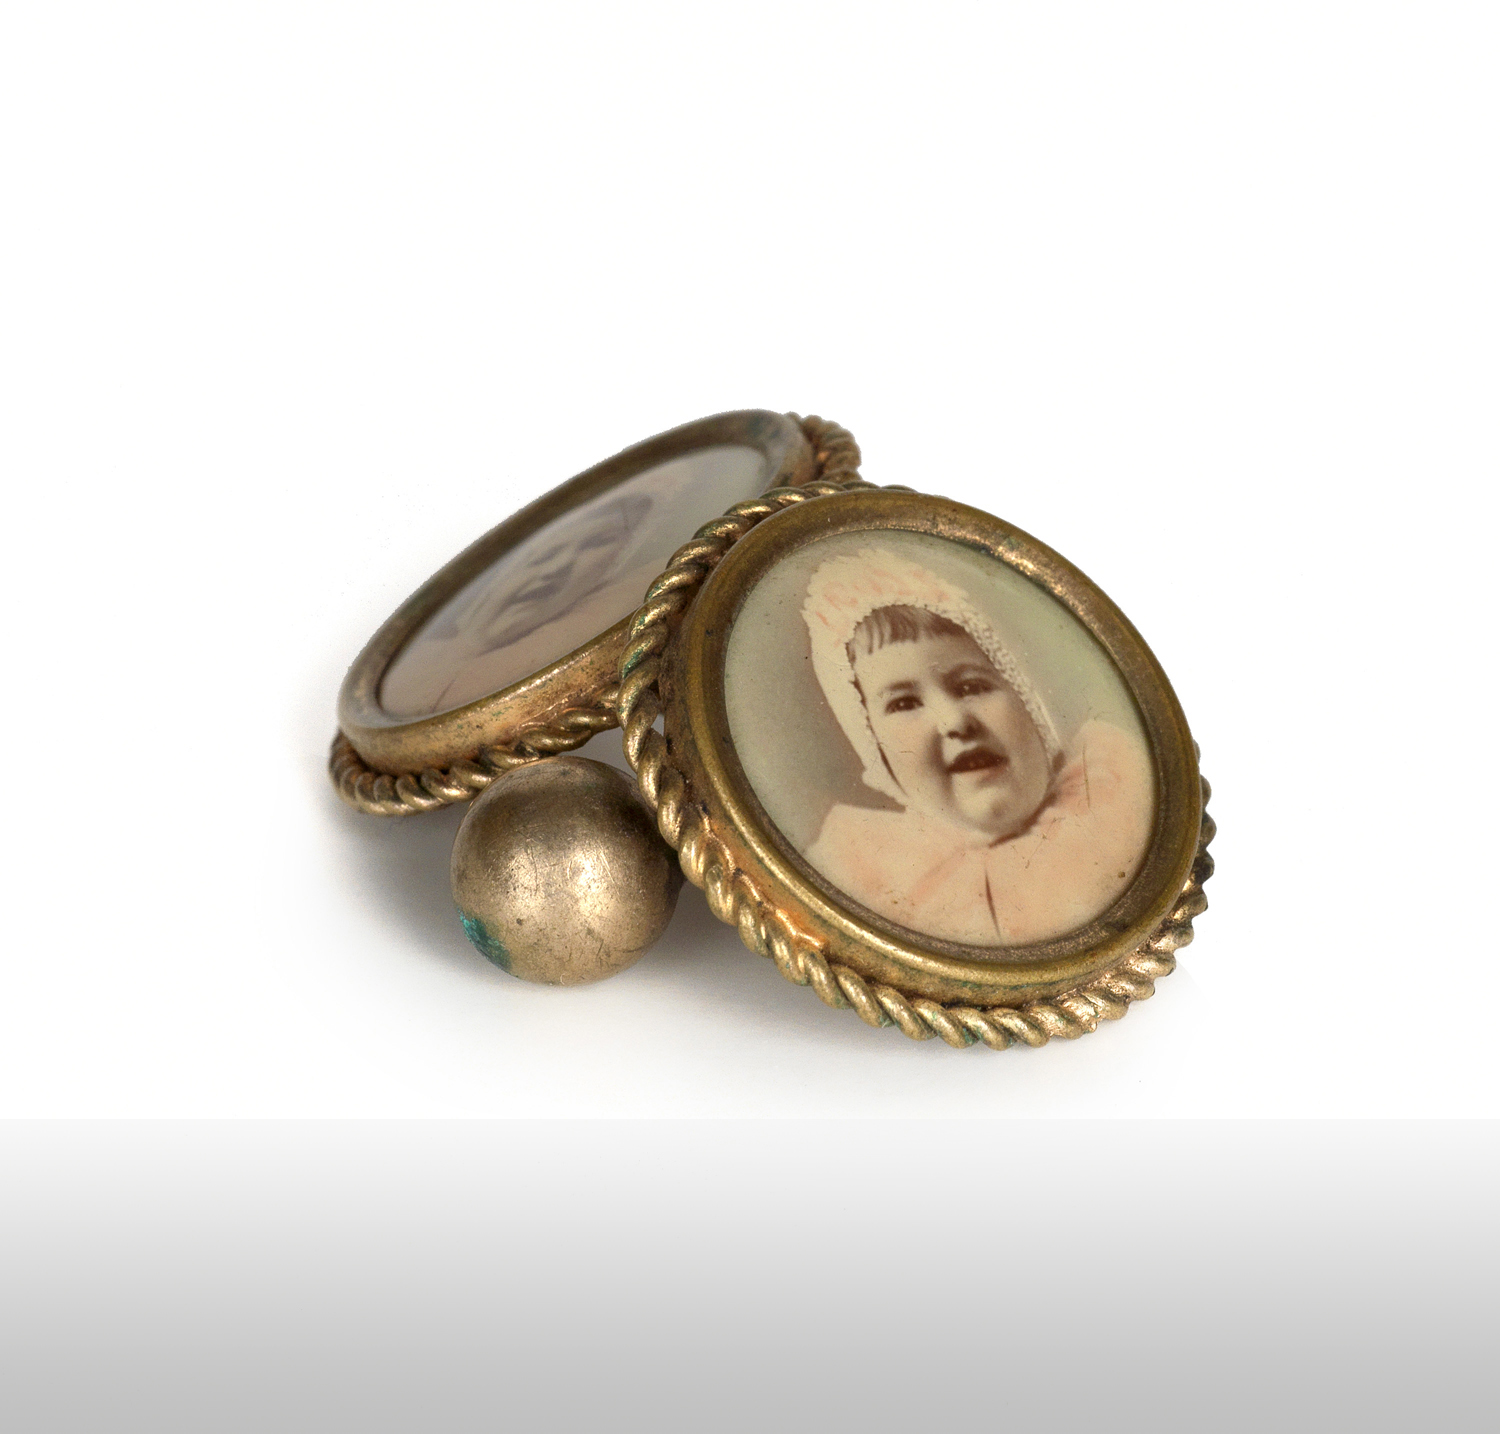    Cuff links with celluloid photographs of a baby. 1910s   